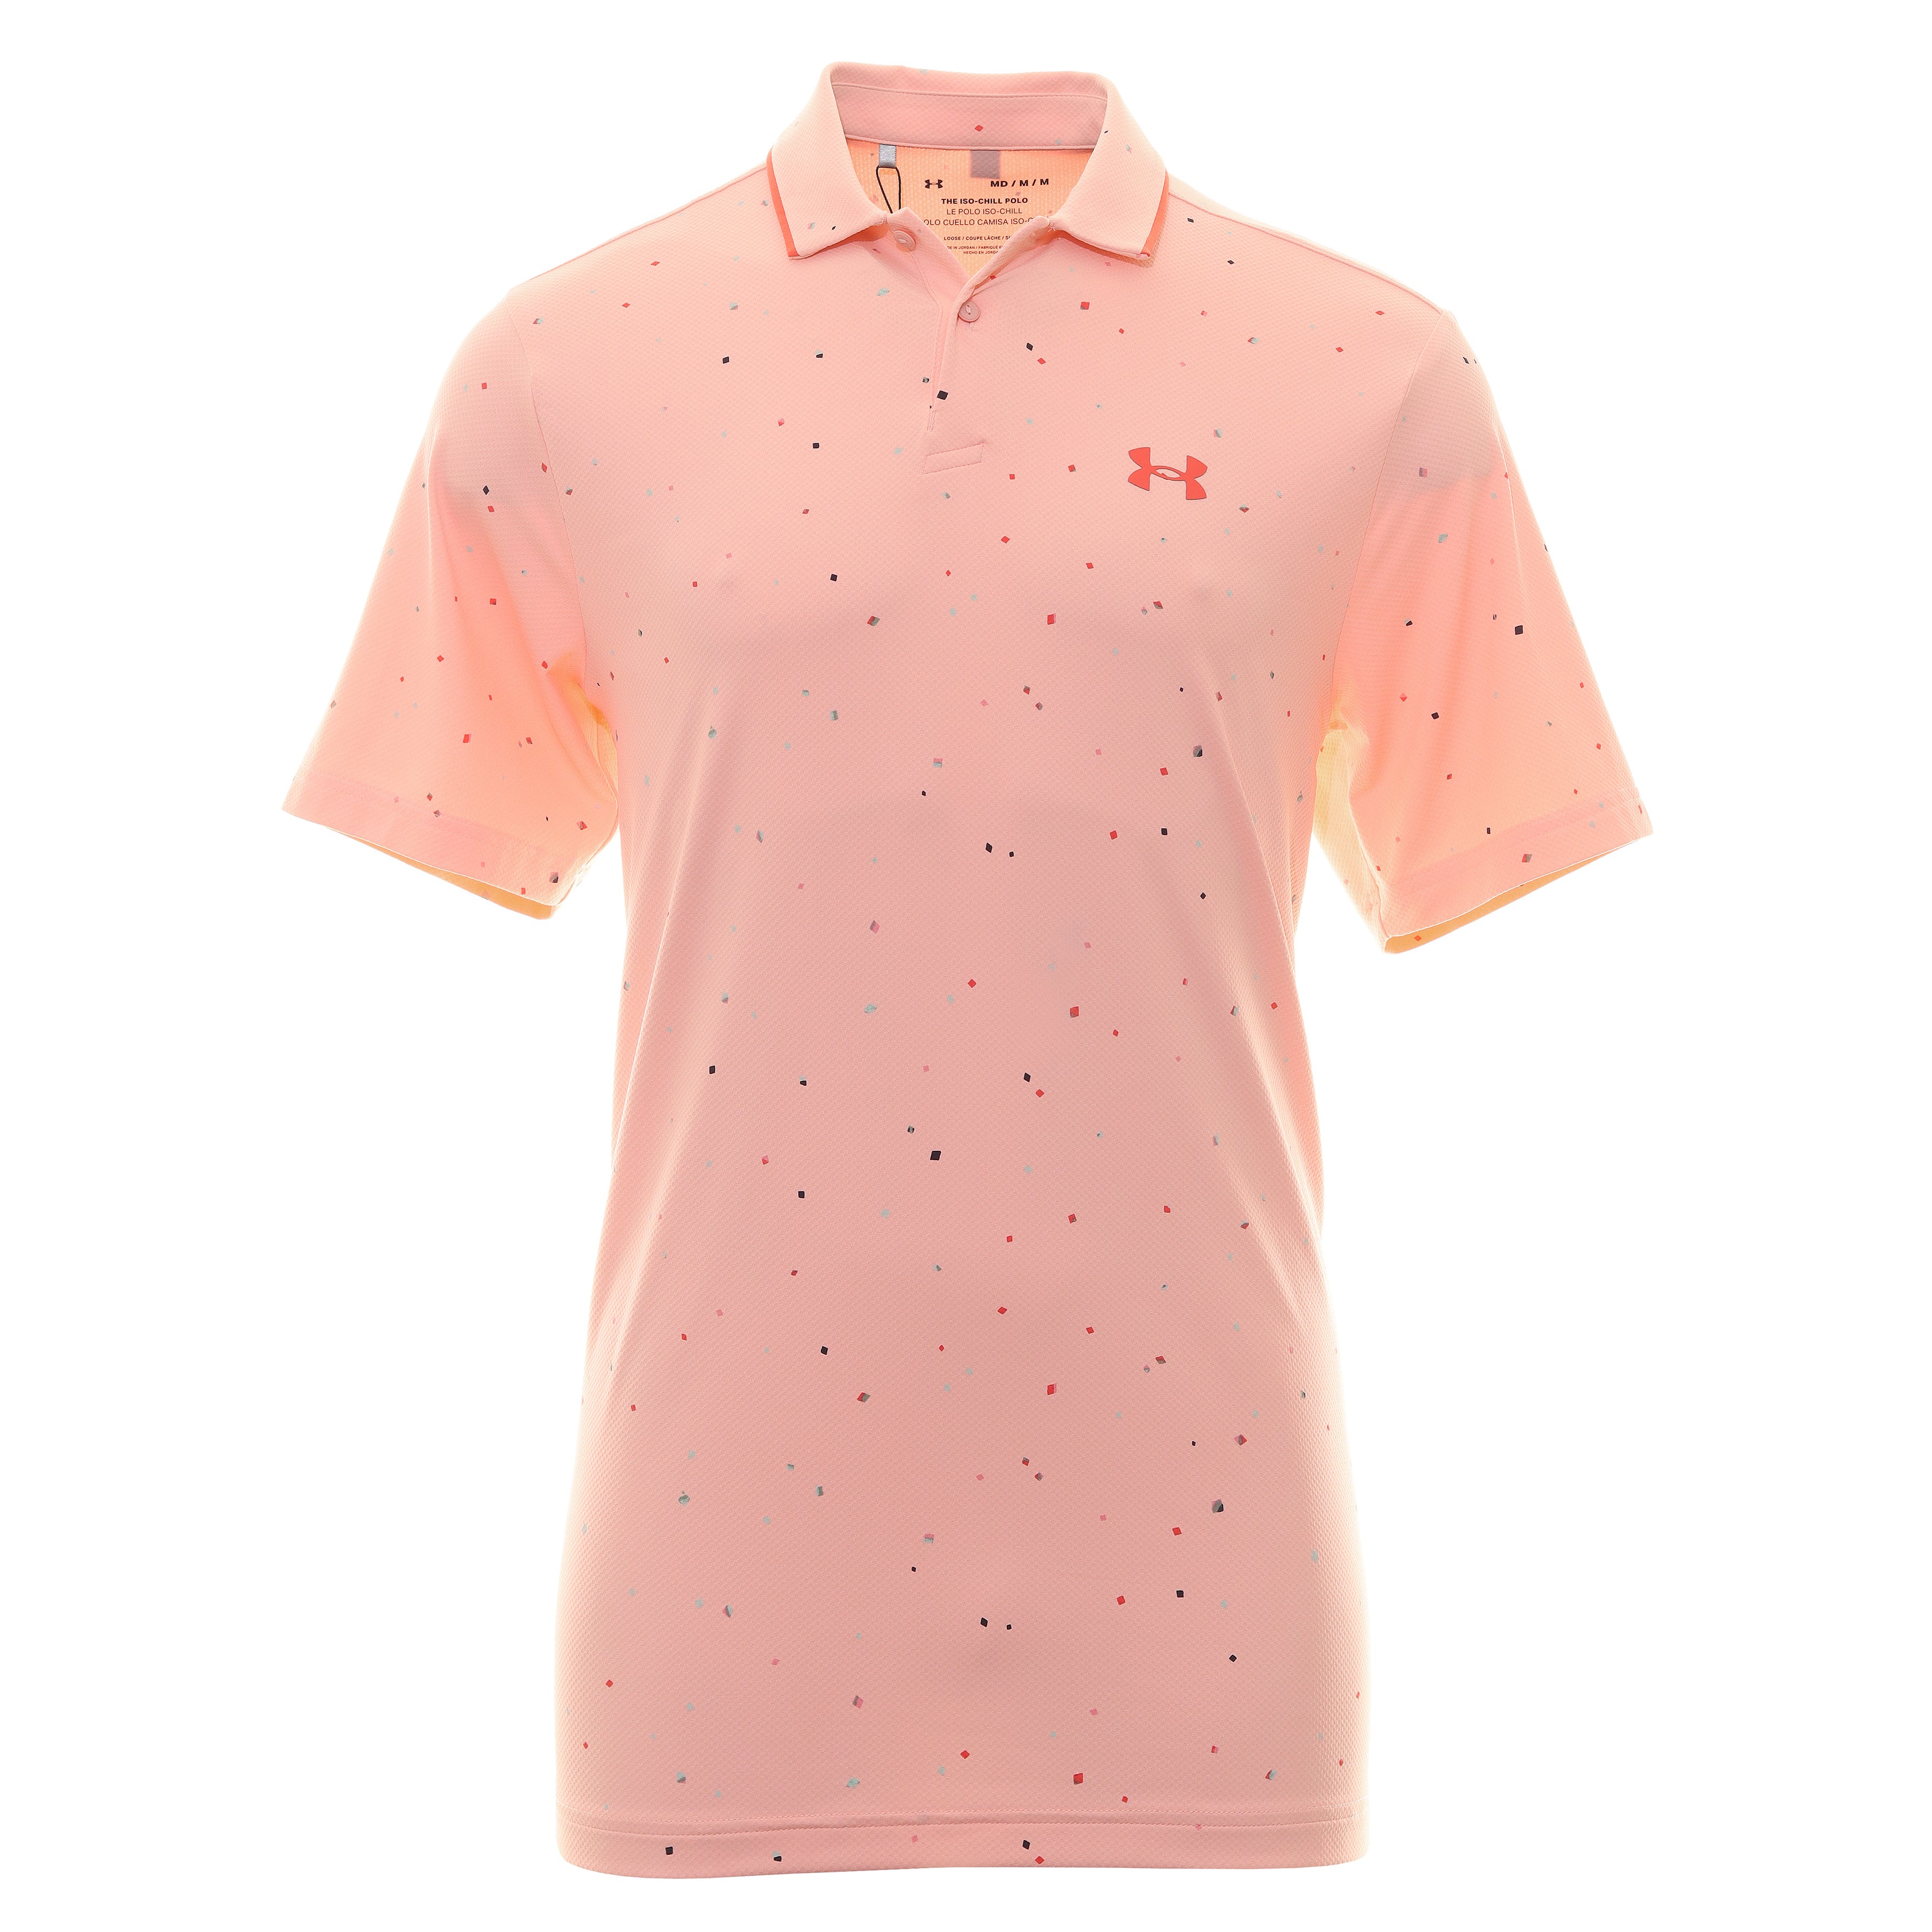 Under Armour Golf Iso-Chill Verge Shirt